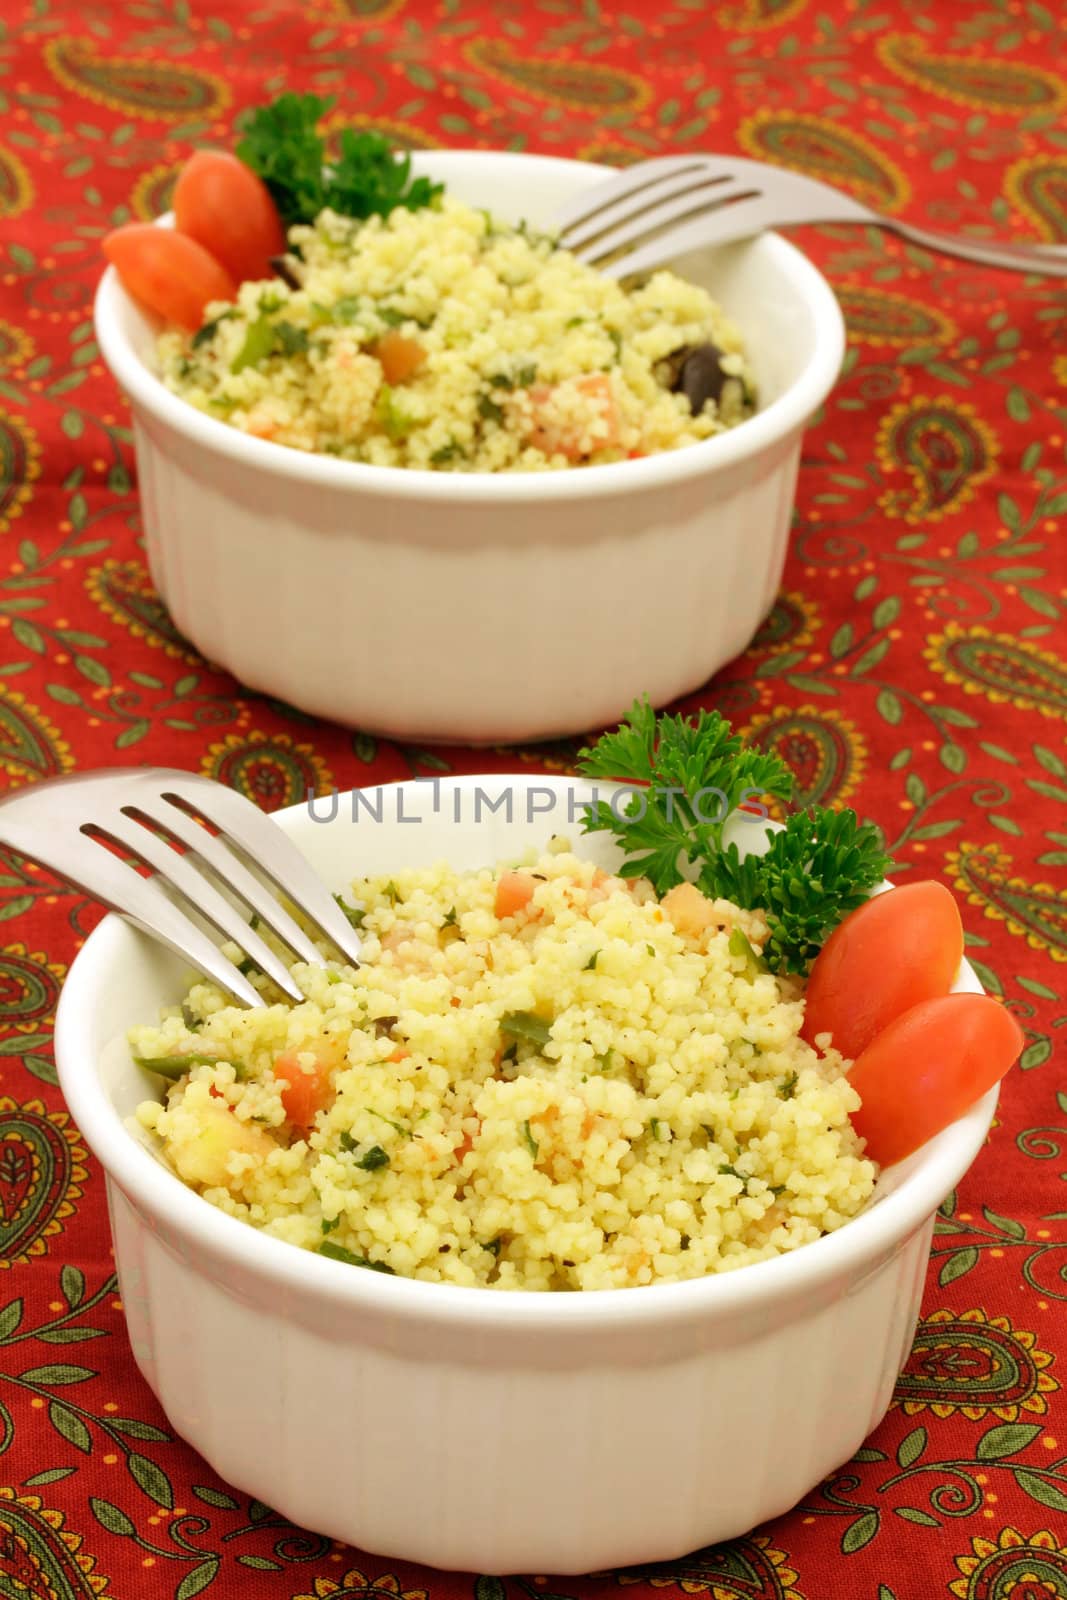 Couscous salad for two by Hbak